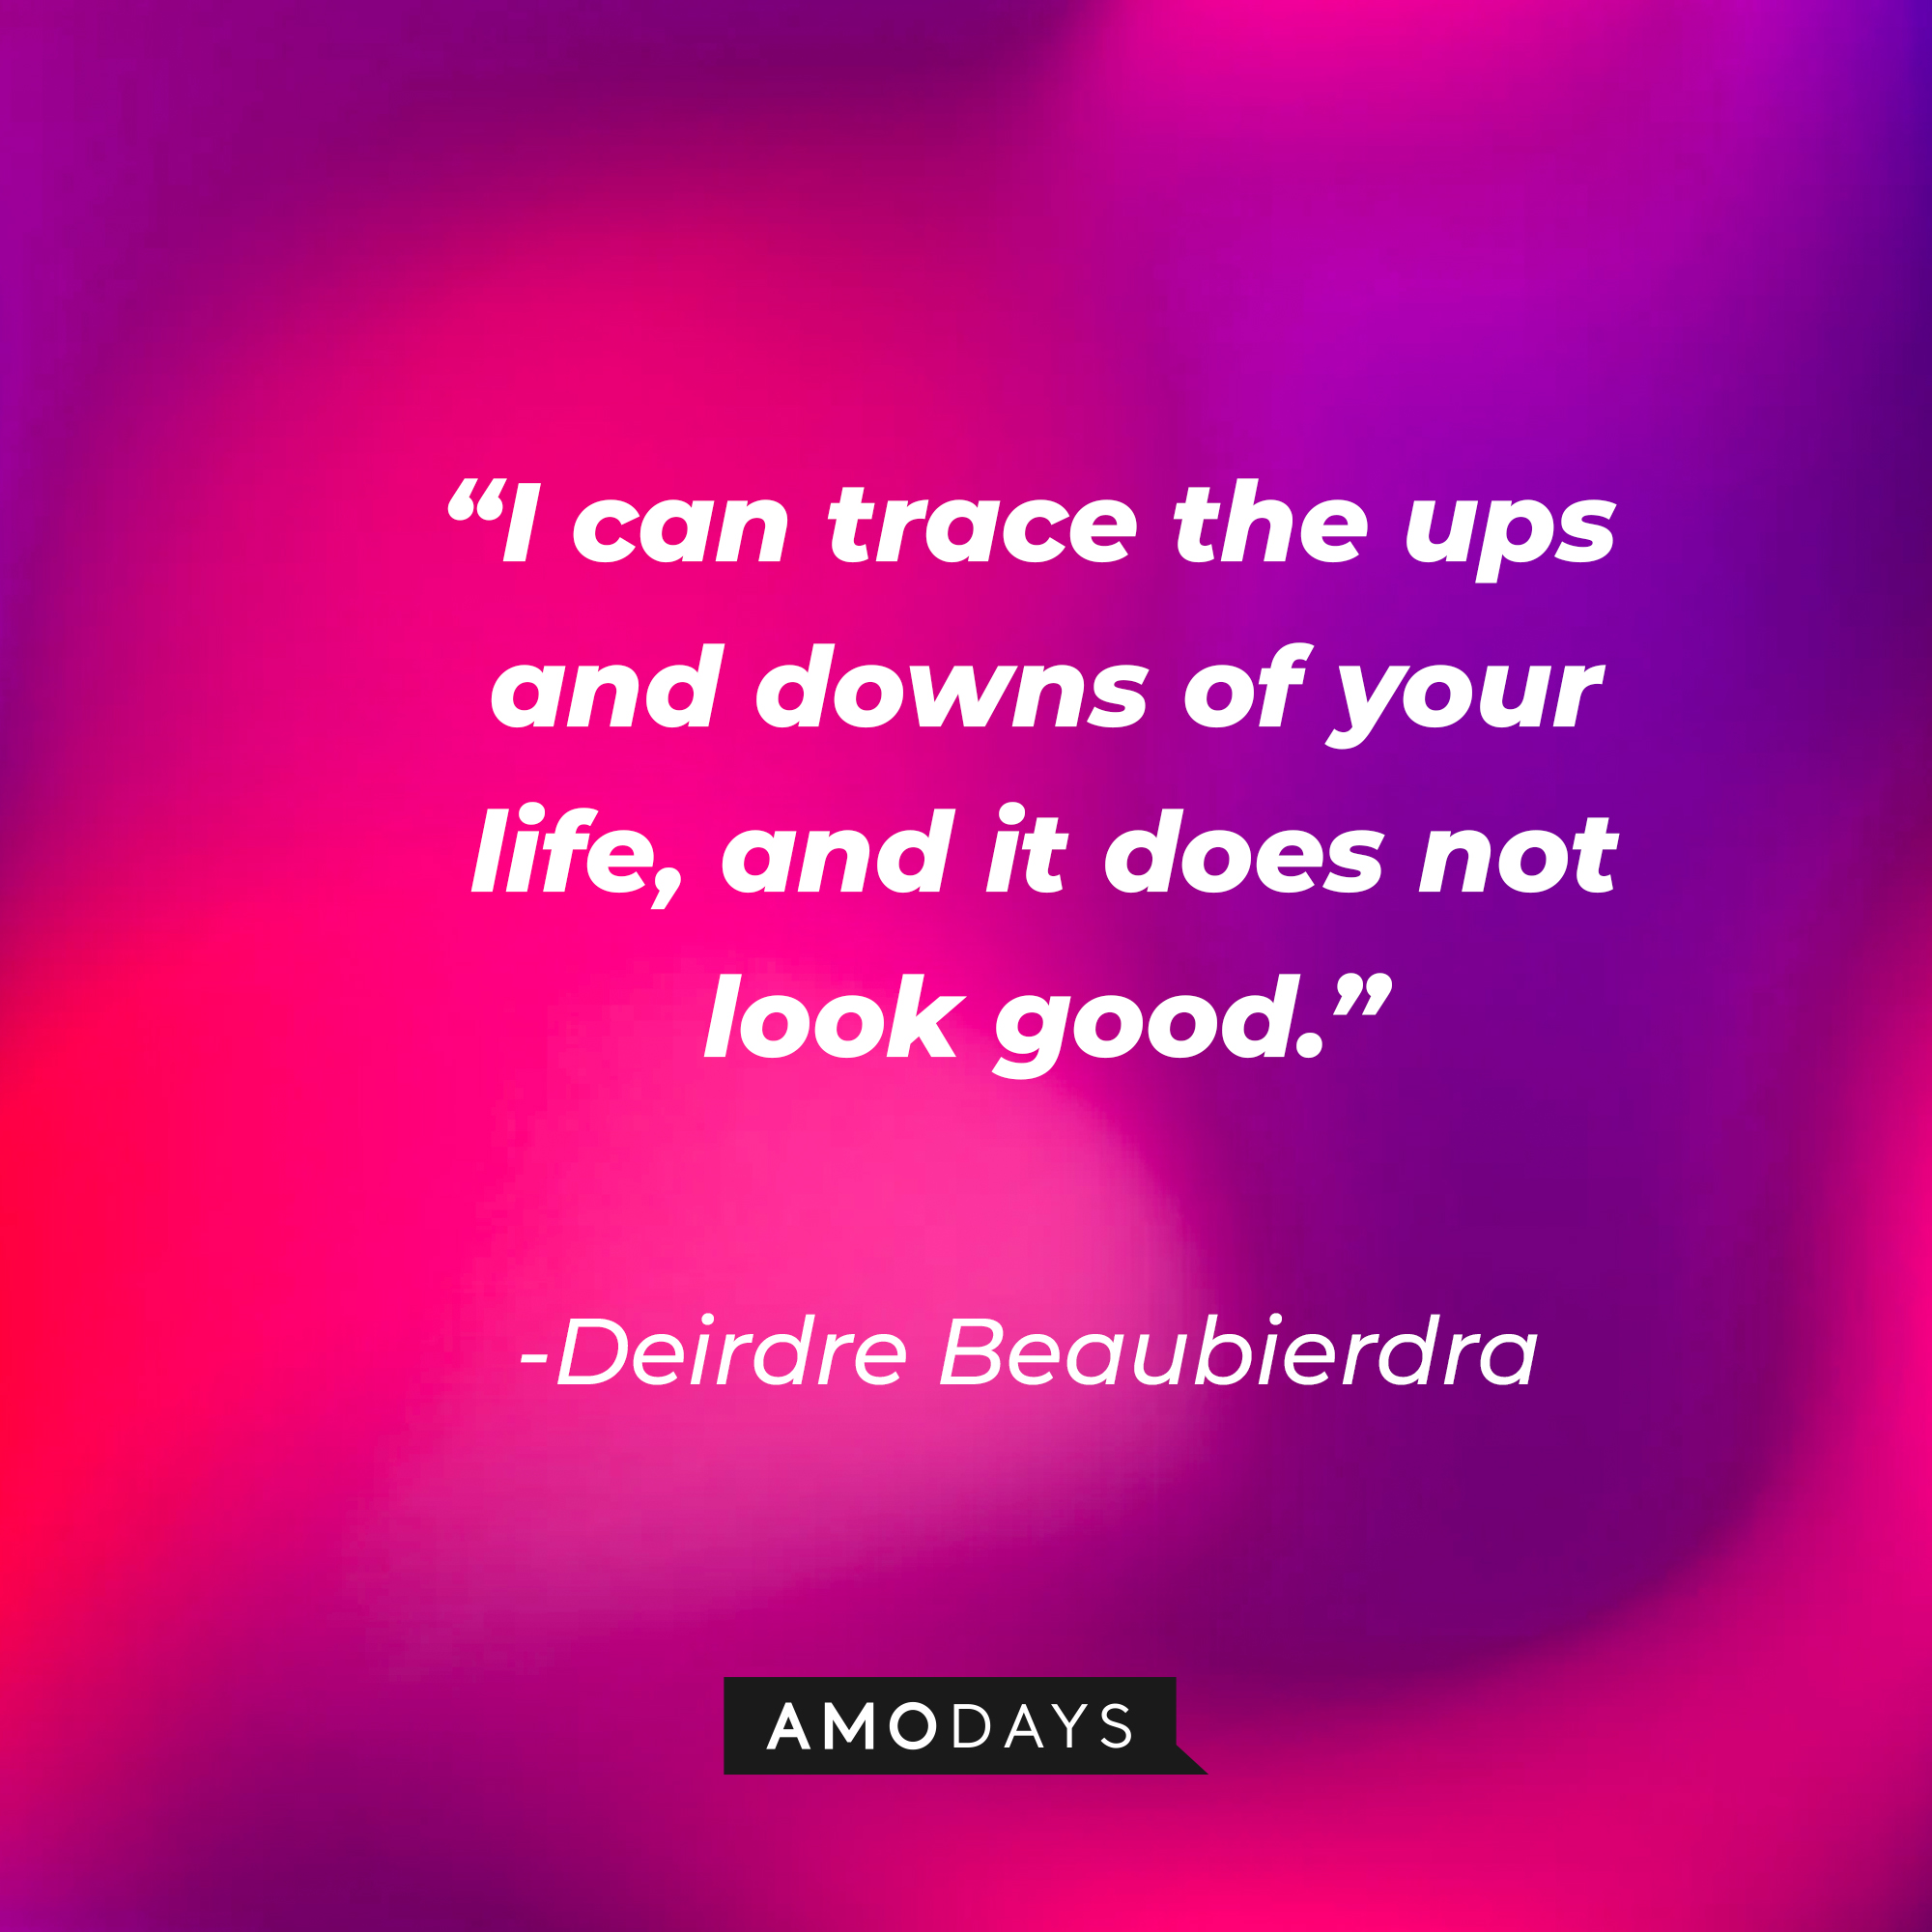 Deirdre Beaubierdrai’s quote: “I can trace the ups and downs of your life, and it does not look good.” | Source: AmoDays